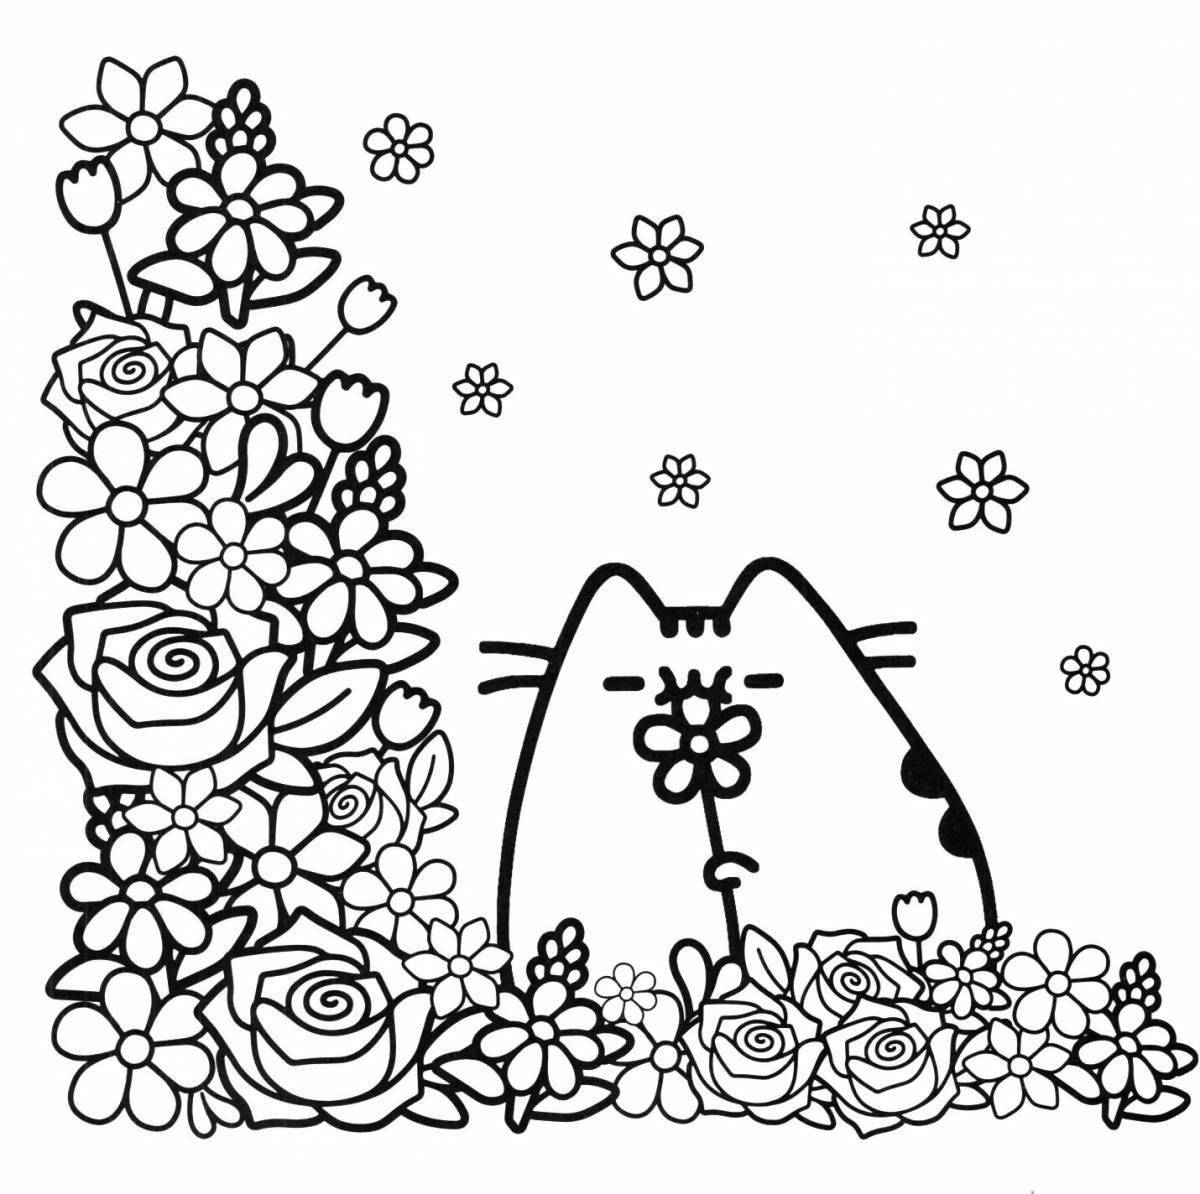 Coloring page fluffy russian blue cat